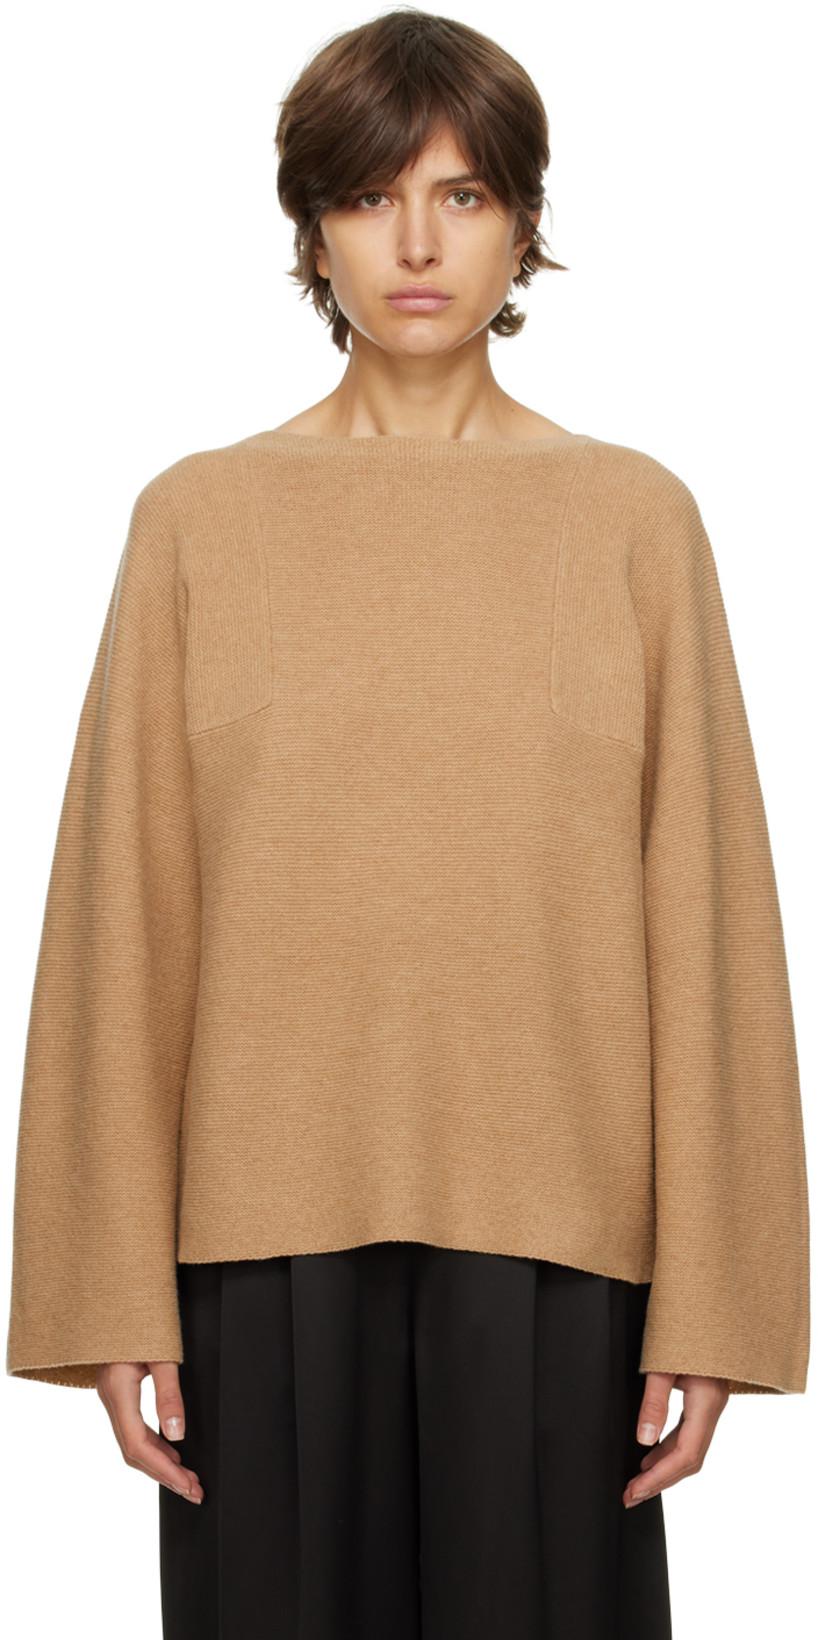 Tan Wiven Sweater by BY MALENE BIRGER